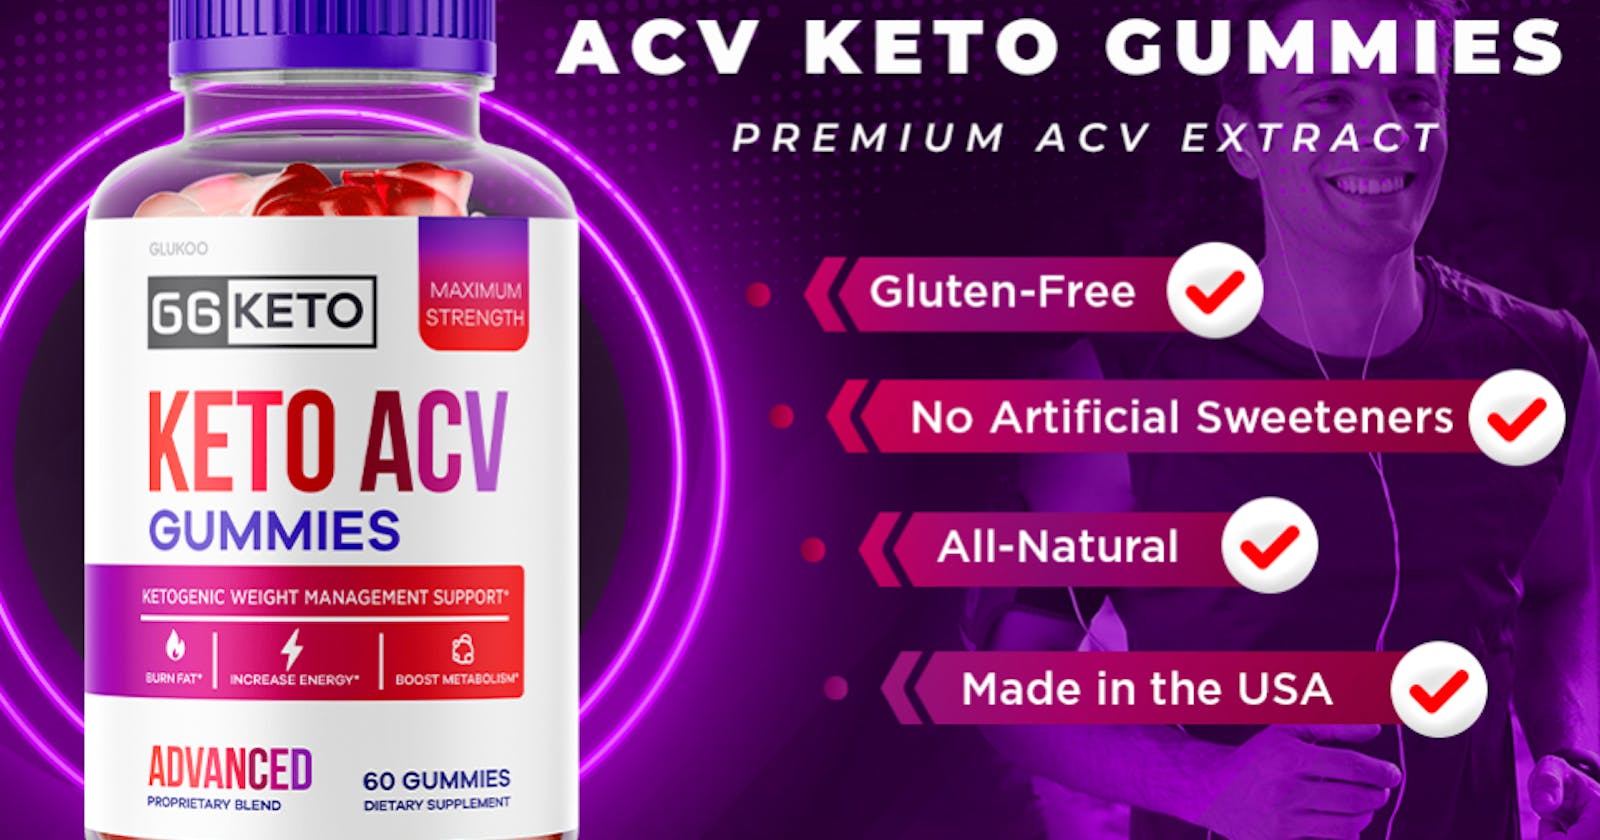 G6 Keto ACV Gummies: 100 % Clinically Certified Ingredients?